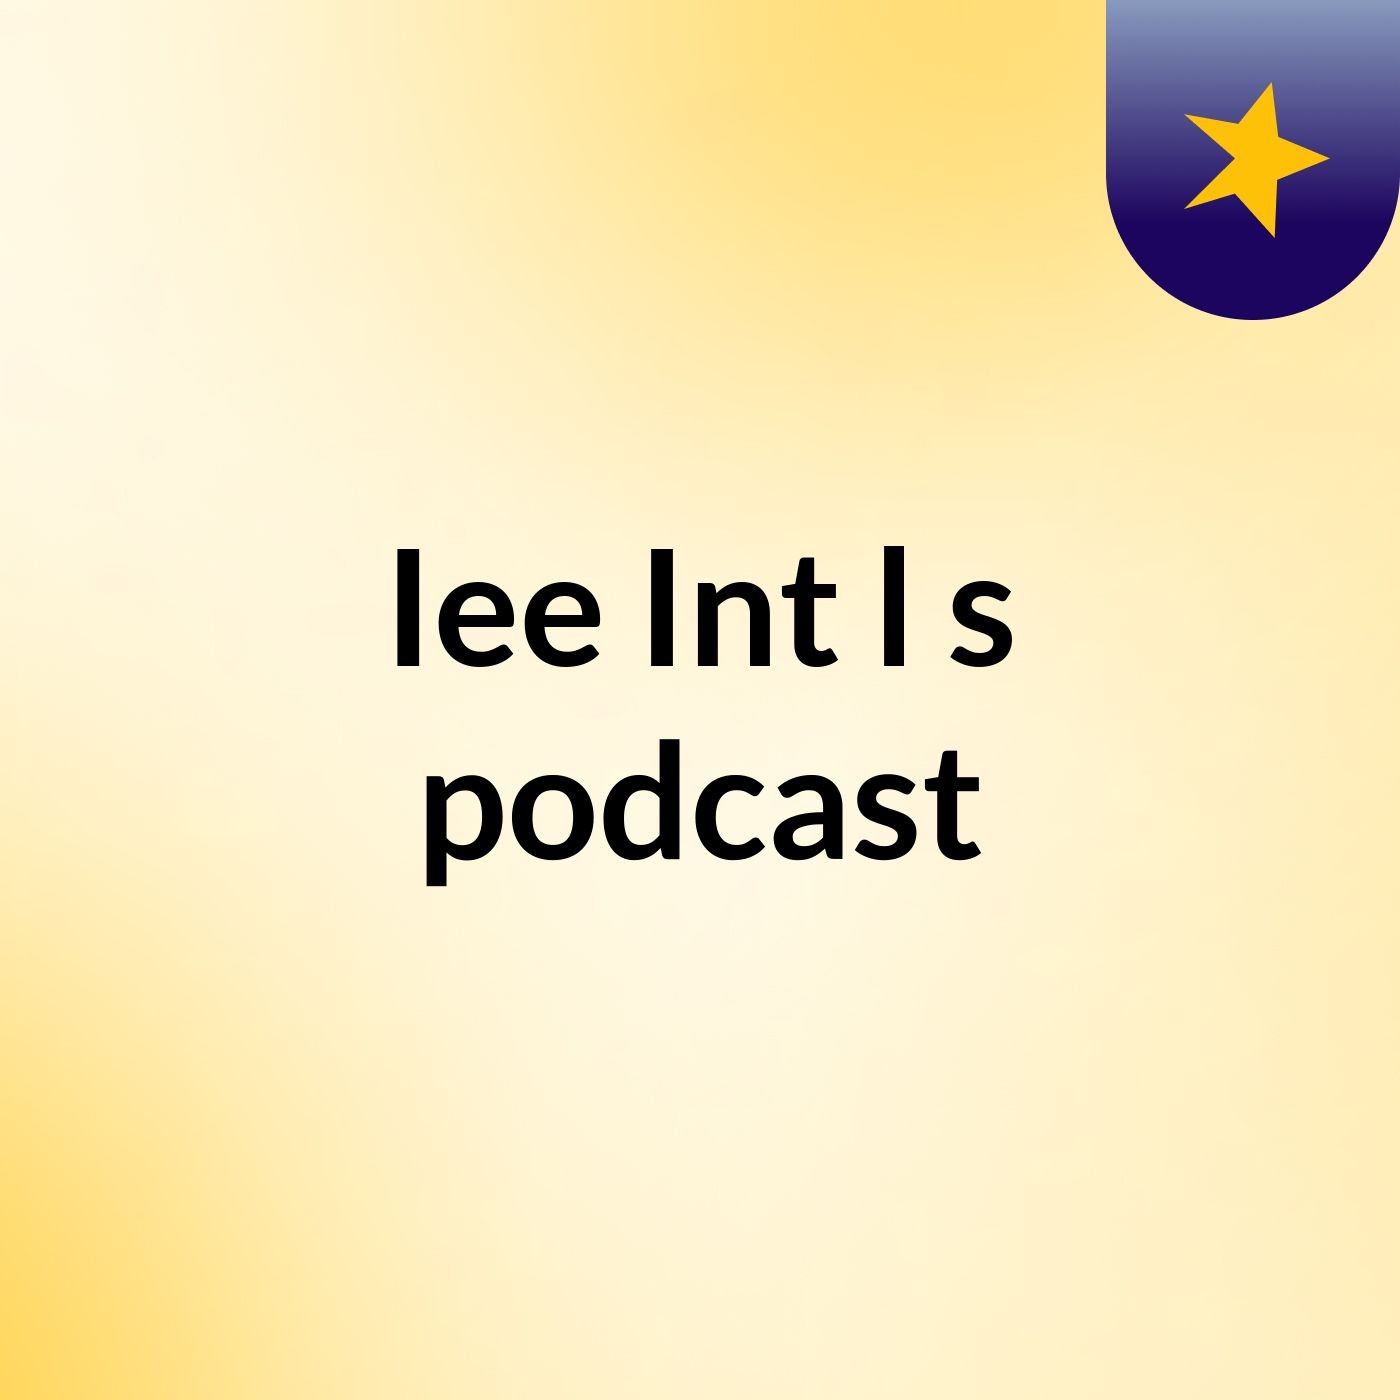 Iee Int'l's podcast